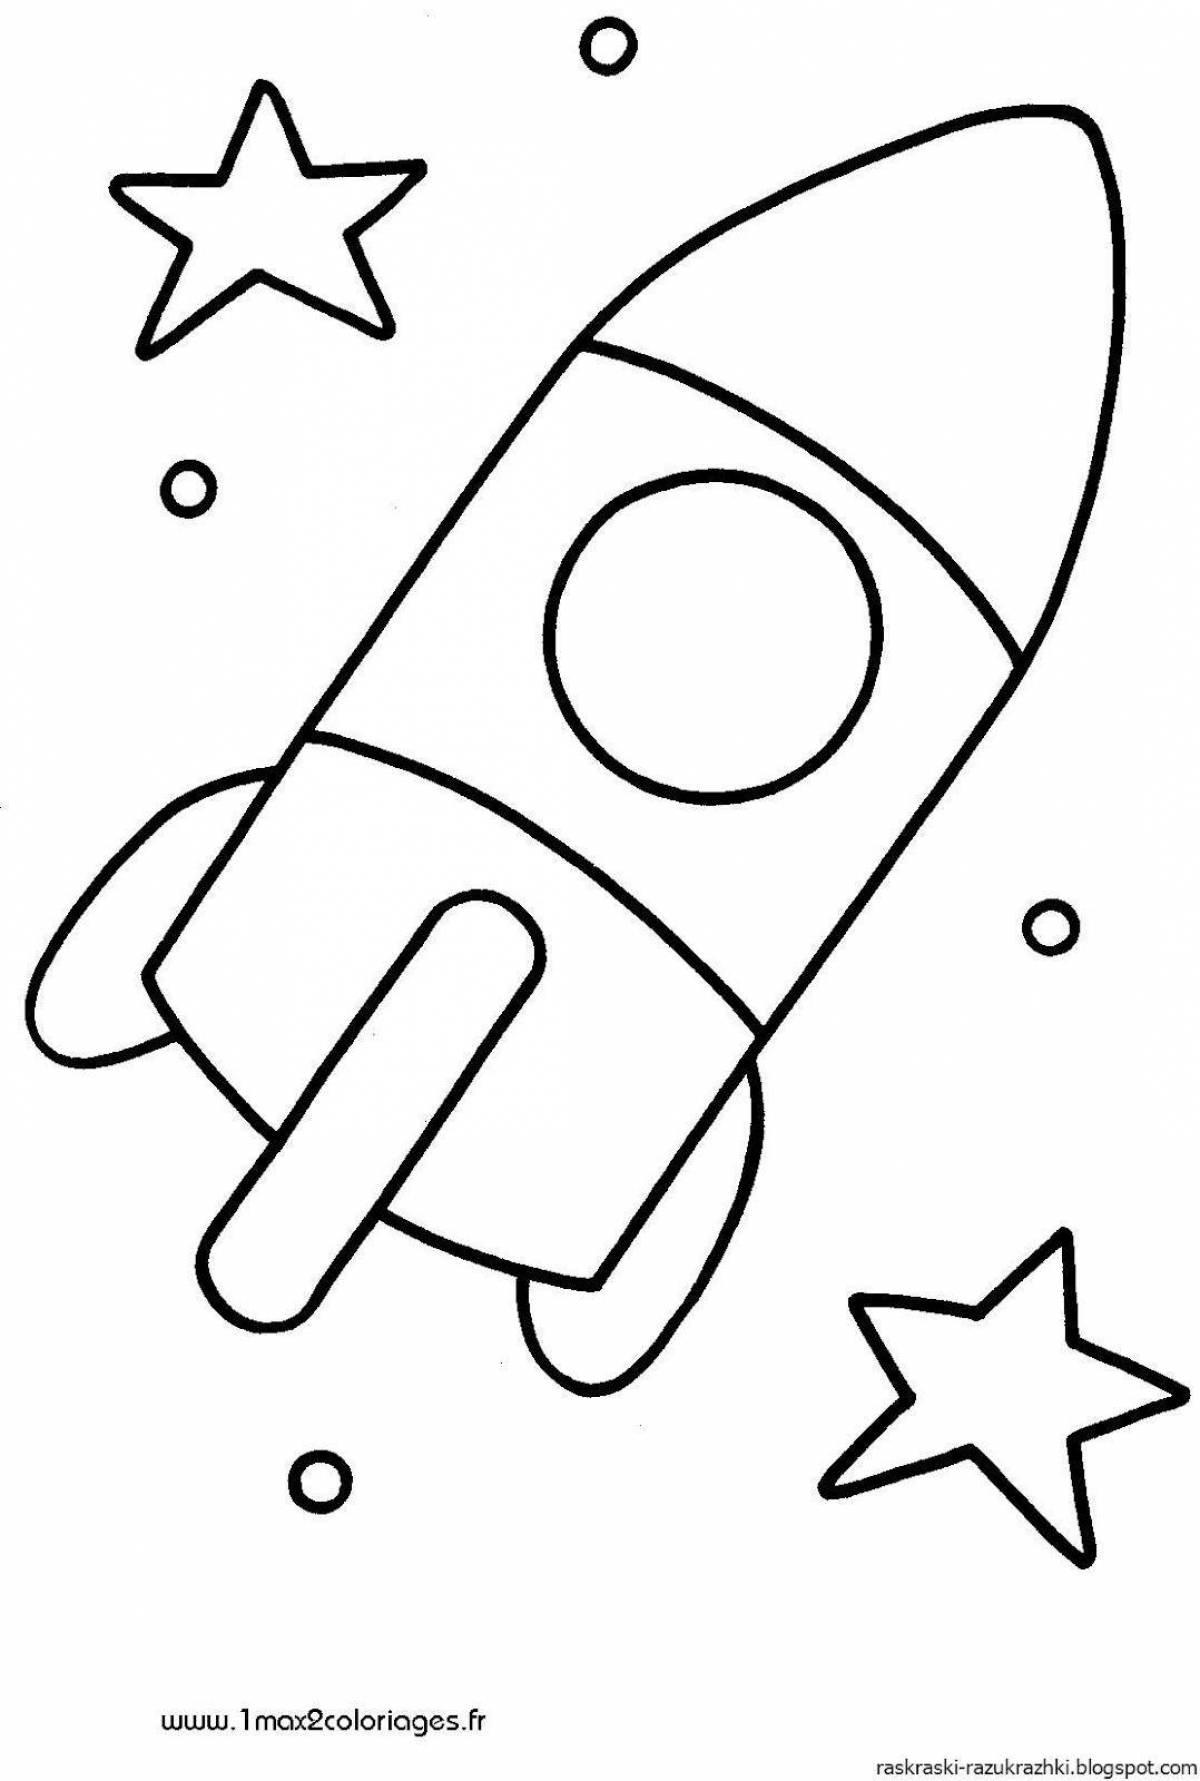 Fun rocket coloring book for kids 5-6 years old